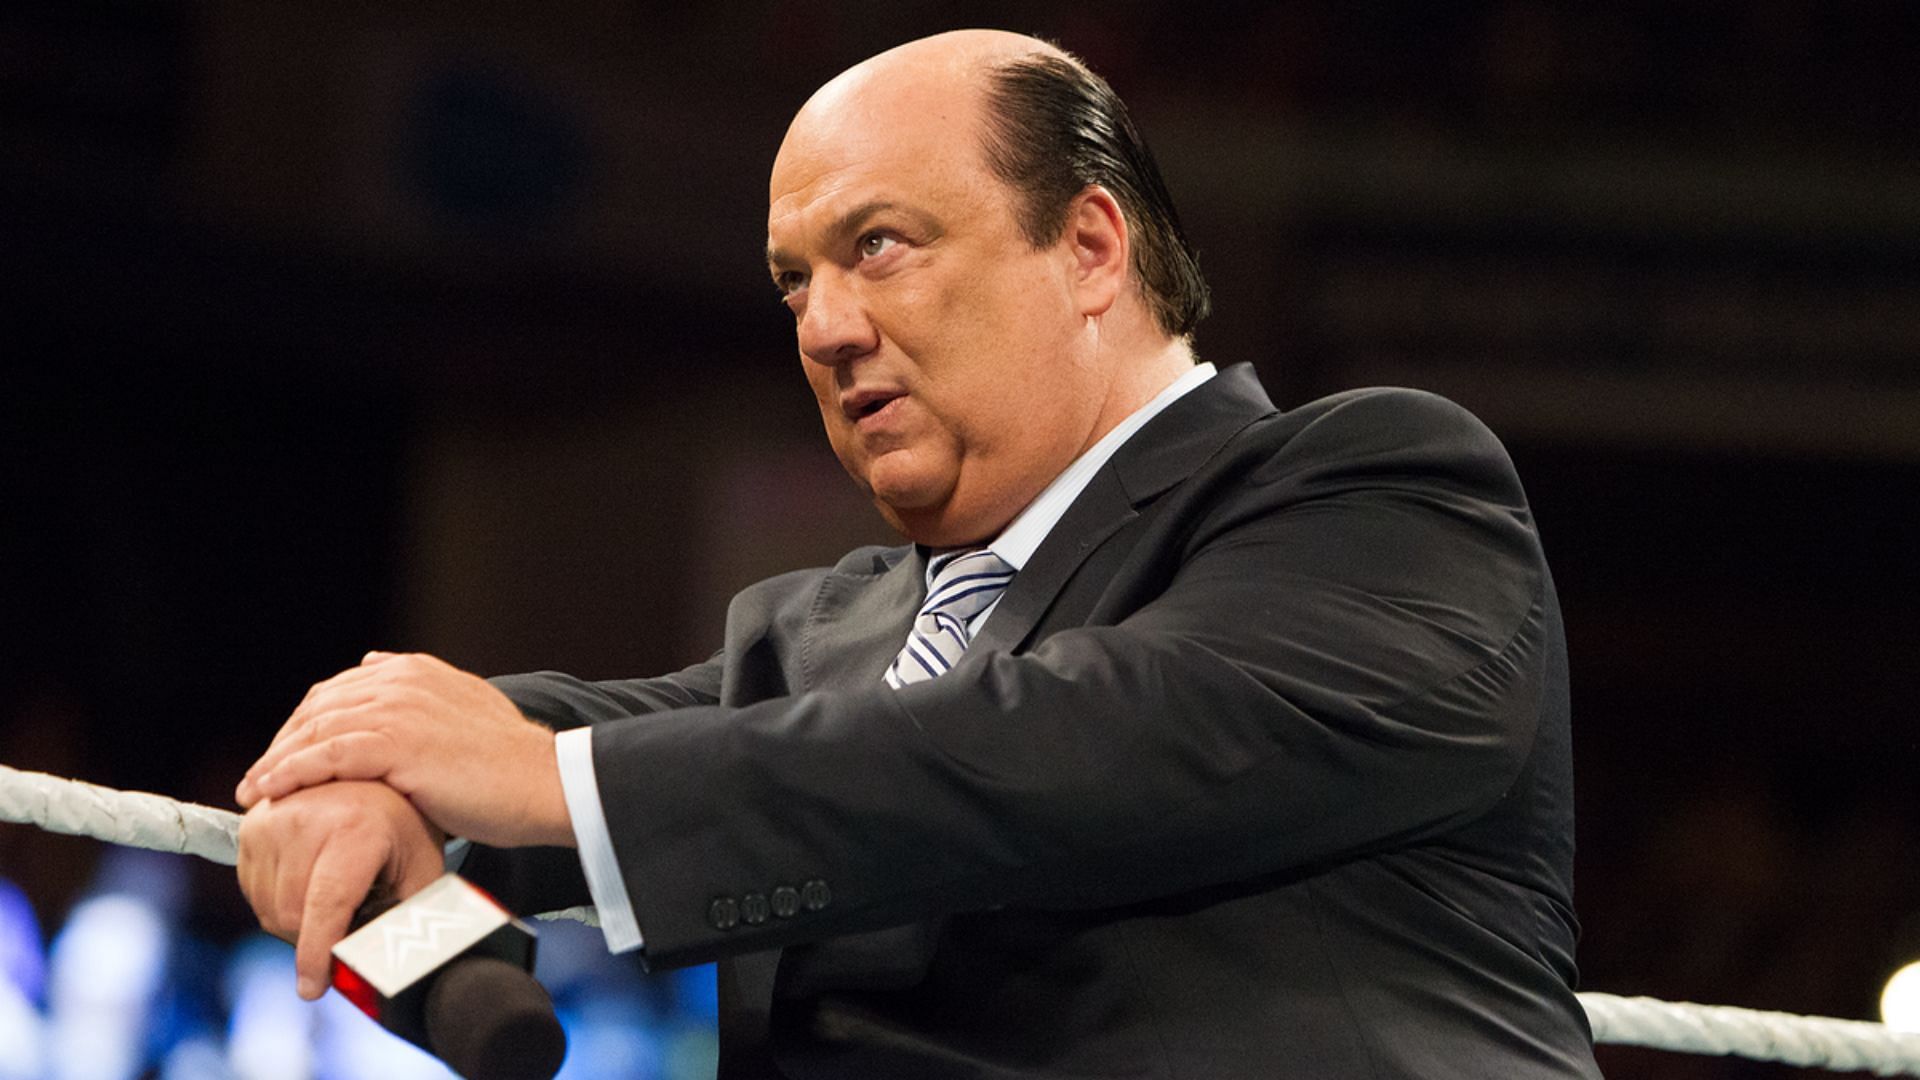 Paul Heyman did not mince his words when claiming his spot as GOAT!